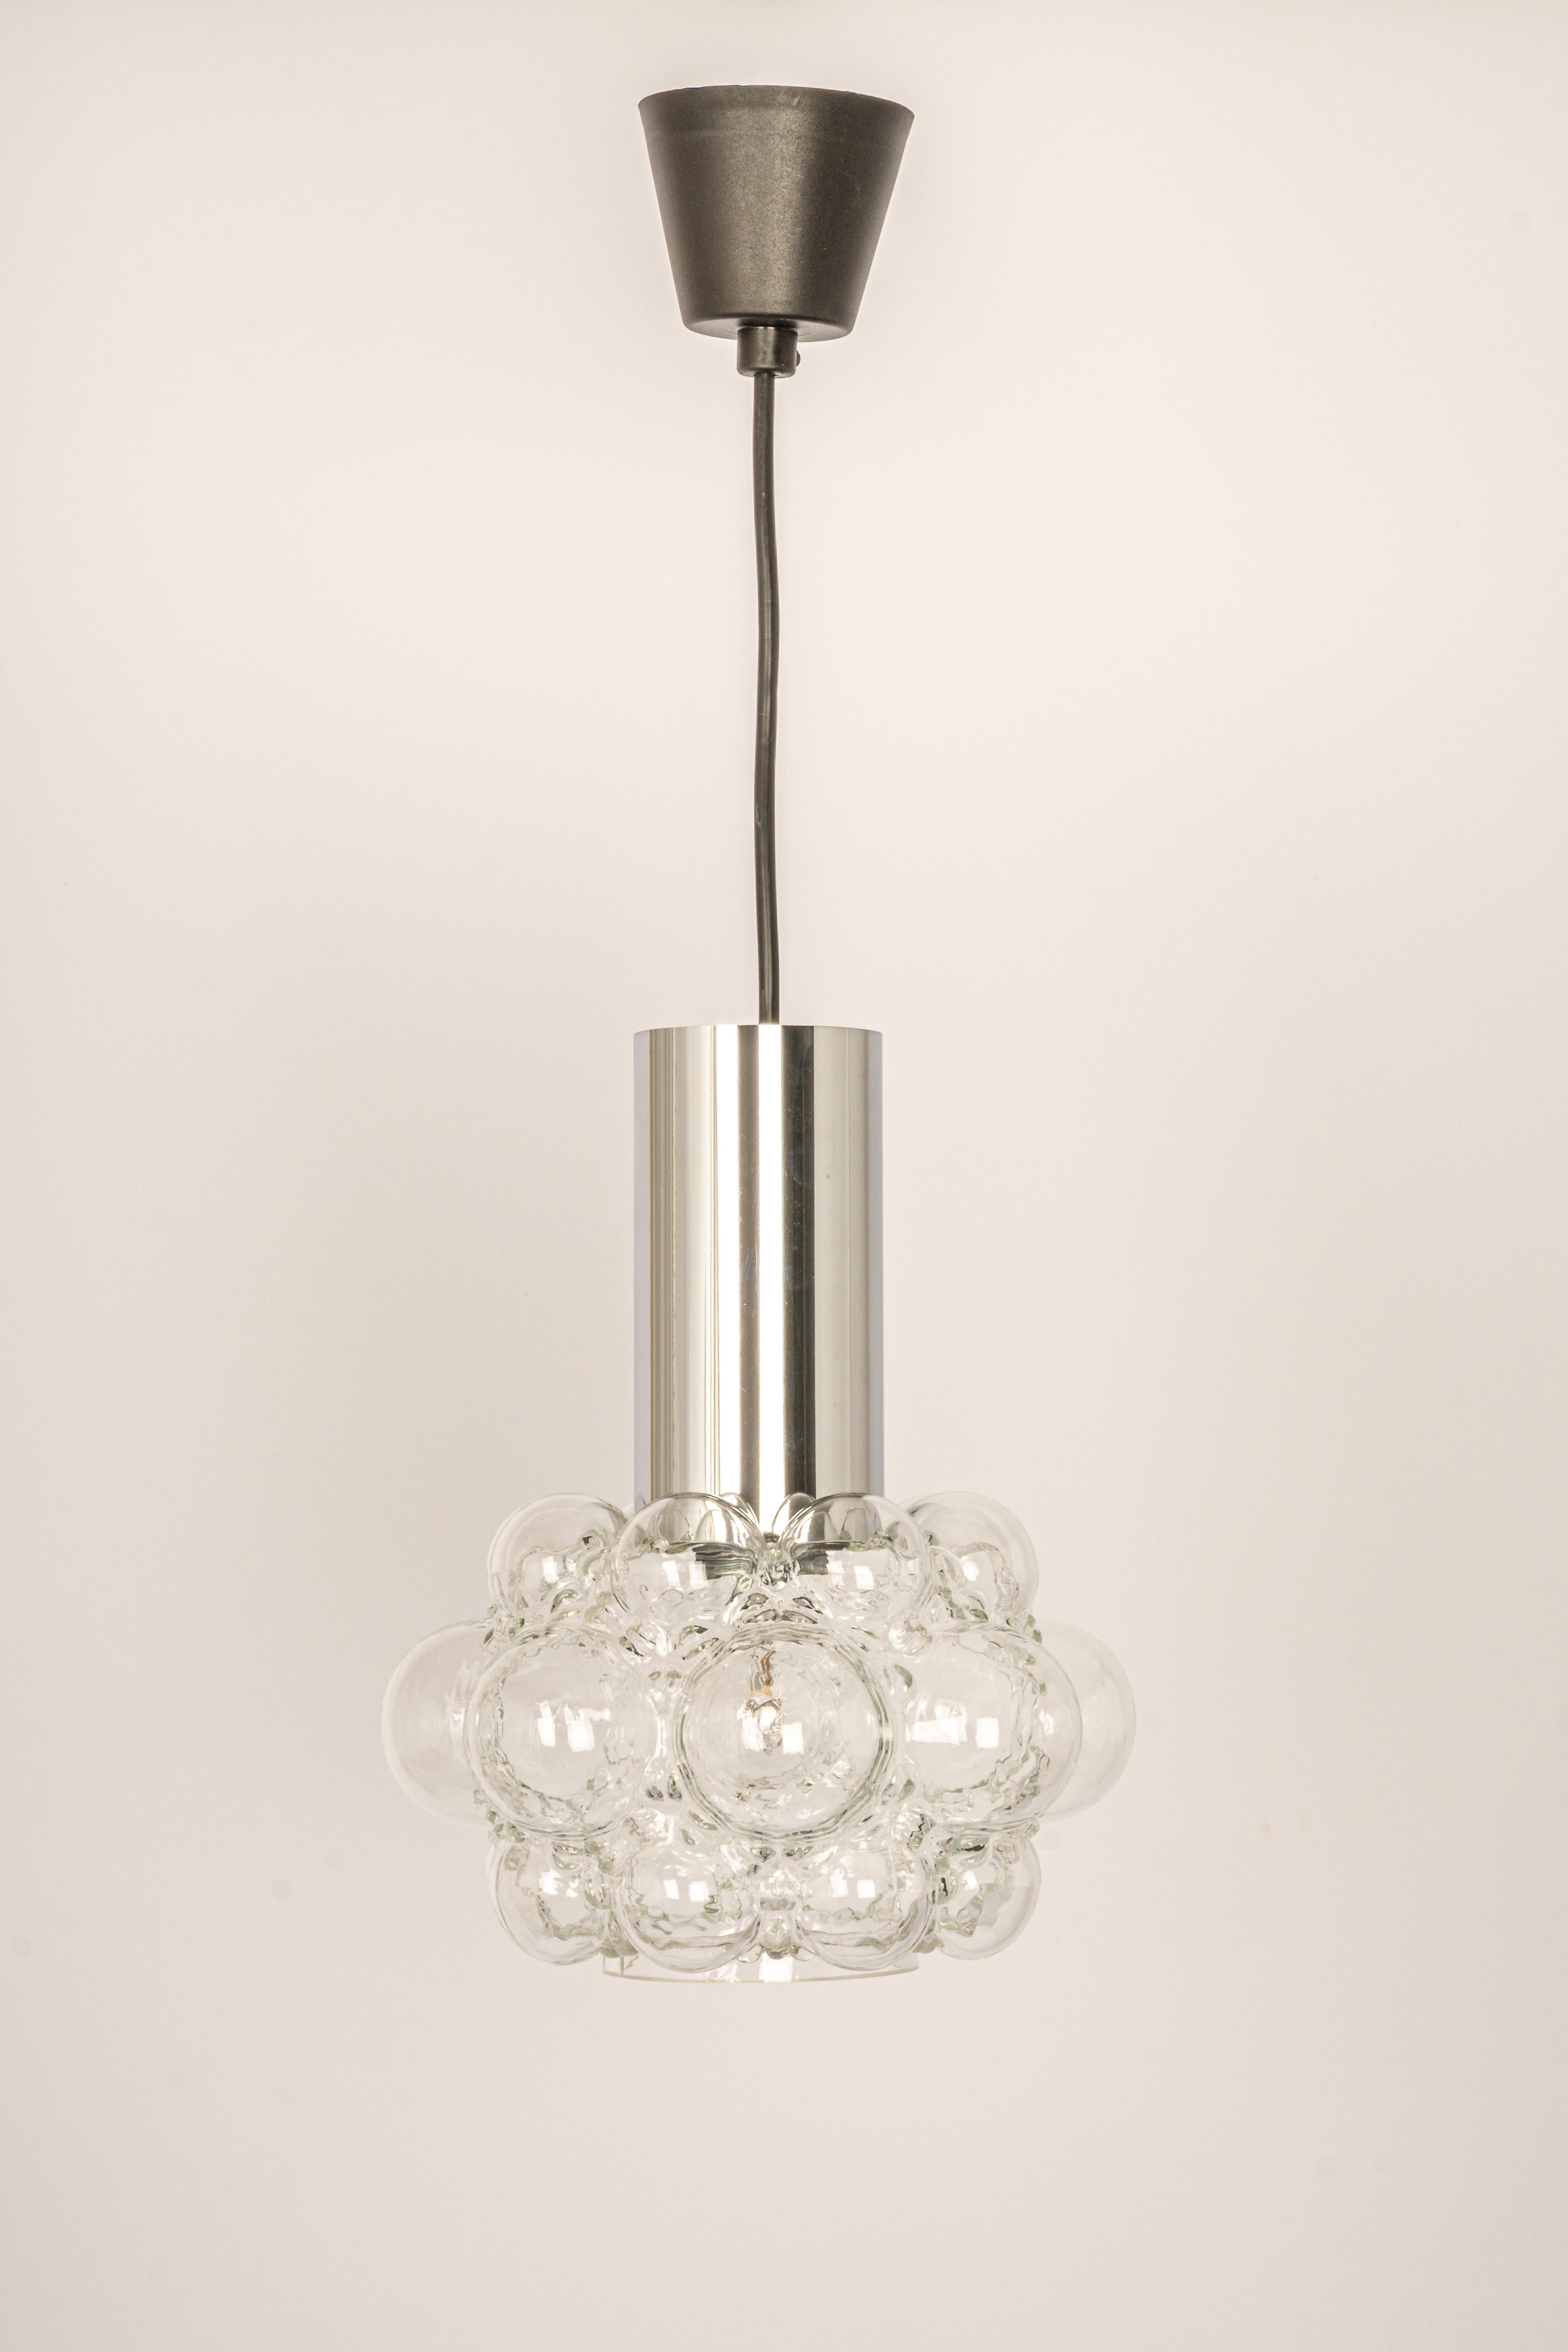 Round bubble glass pendant designed by Helena Tynell for Limburg, manufactured in Germany, circa the 1970s.

Sockets: needs 1 x E27 standard bulb with 100W max each.
Light bulbs are not included. It is possible to install this fixture in all